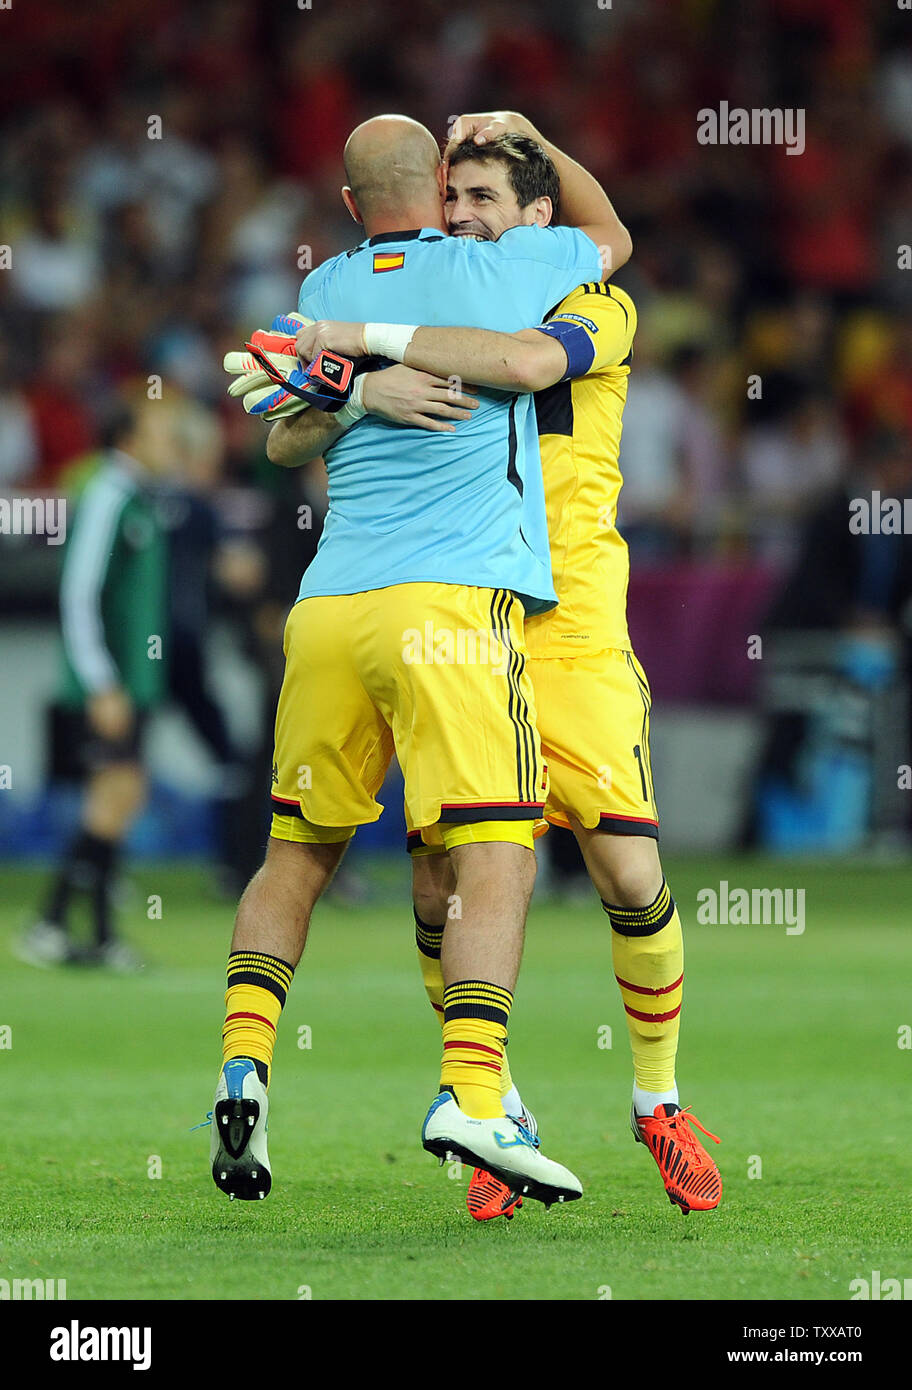 Iker Casillas of Spain (R) celebrates with team-mate Pepe Reina following the Euro 2012 Final match at the Olympic Stadium in Kiev, Ukraine on July 1, 2012.  Spain defeated Italy 4-0 to win the championship.   UPI/Chris Brunskill Stock Photo